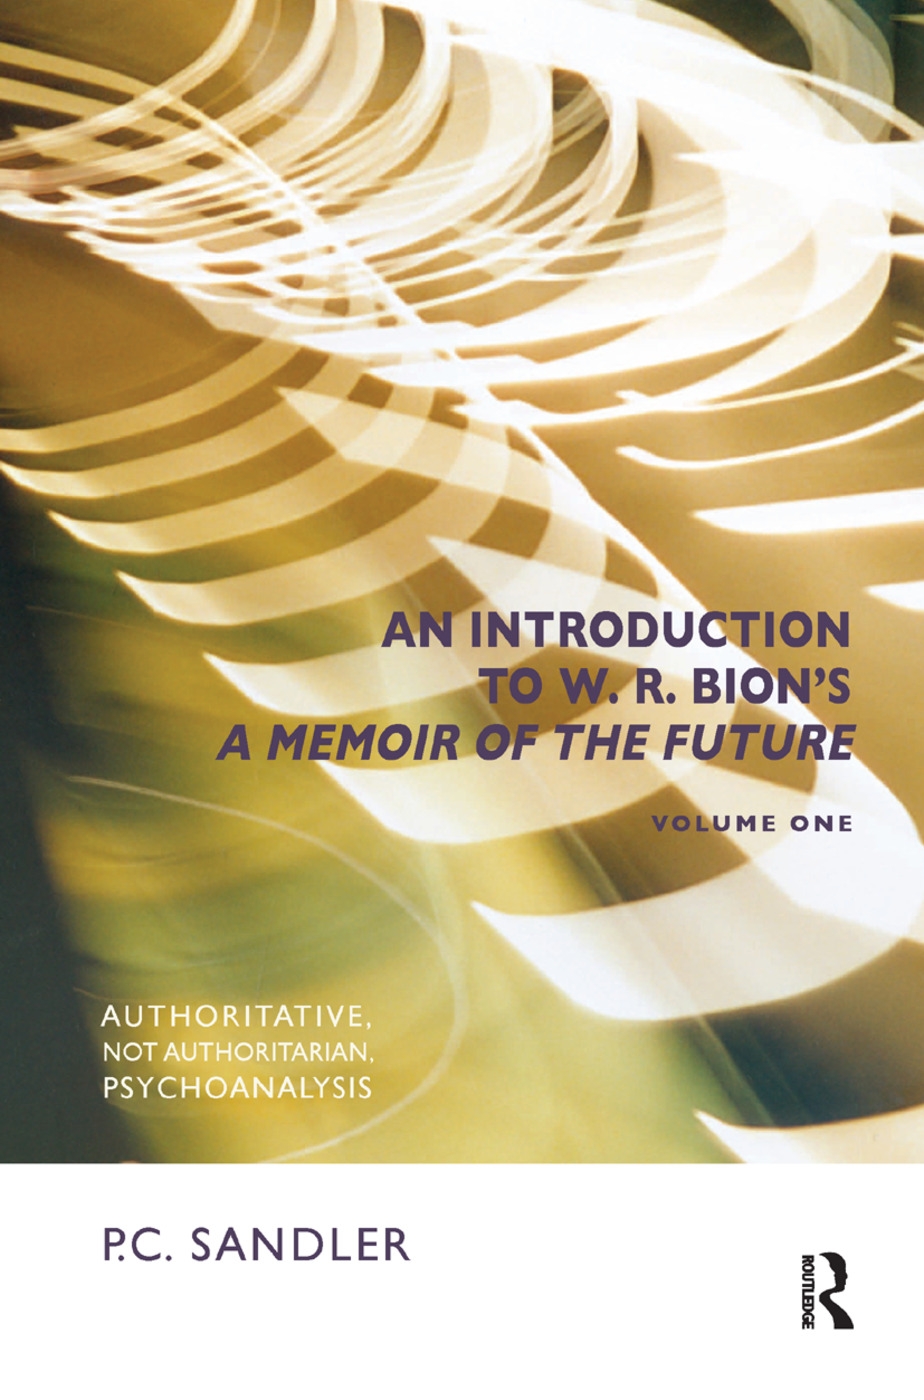 An Introduction to ’A Memoir of the Future’ by W. R. Bion: Authoritative, Not Authoritarian, Psychoanalysis